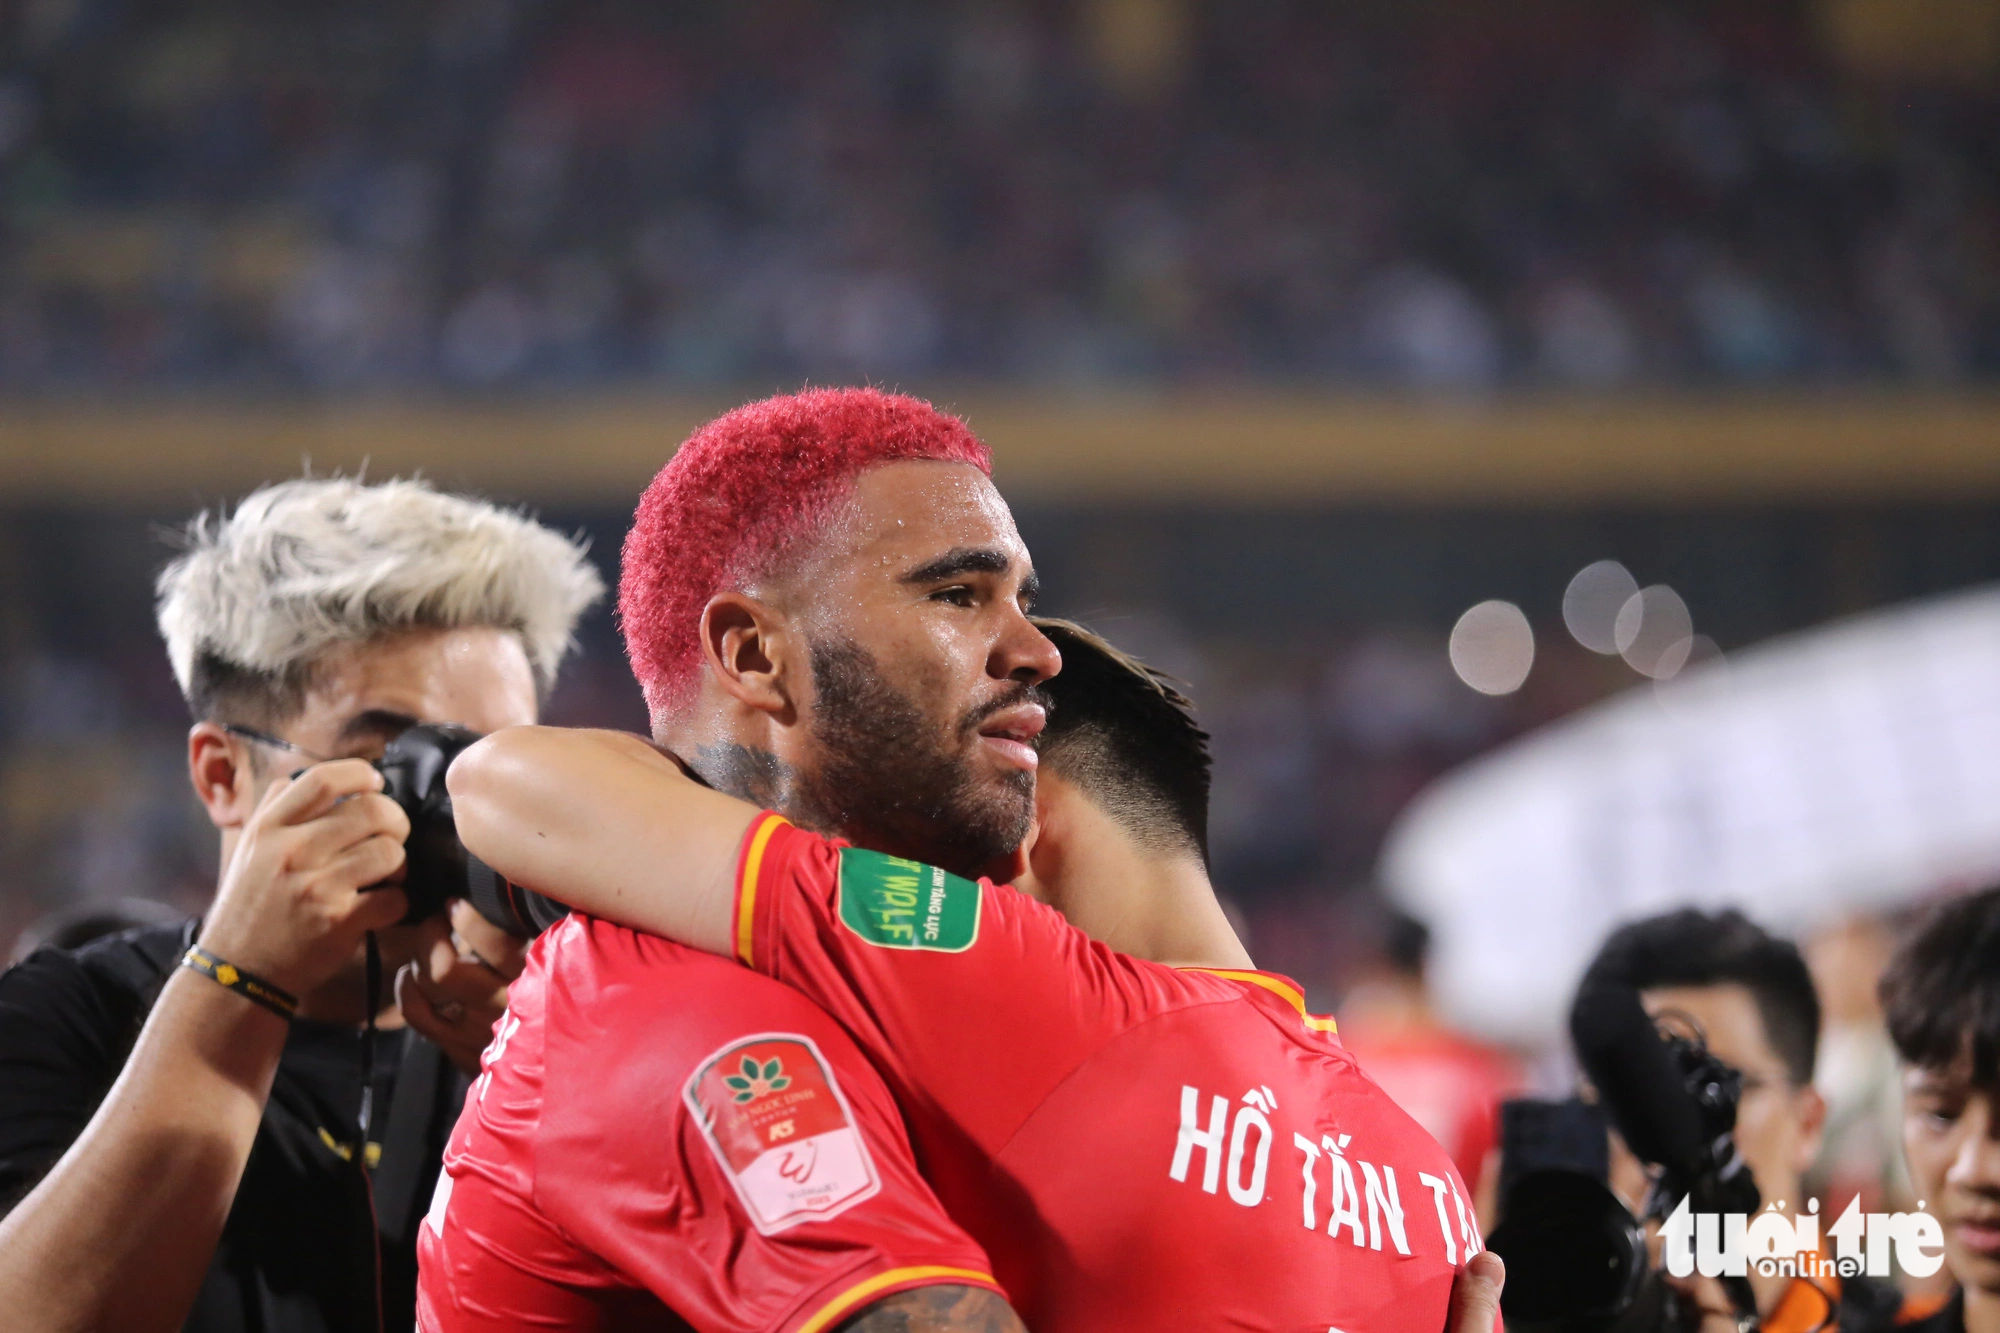 Cong An Hanoi FC’s Jhon Cley gives Ho Tan Tai a hug after winning the V-League 1 2023 at Hang Day Stadium in Hanoi, August 27, 2023. Photo: Nam Tran / Tuoi Tre